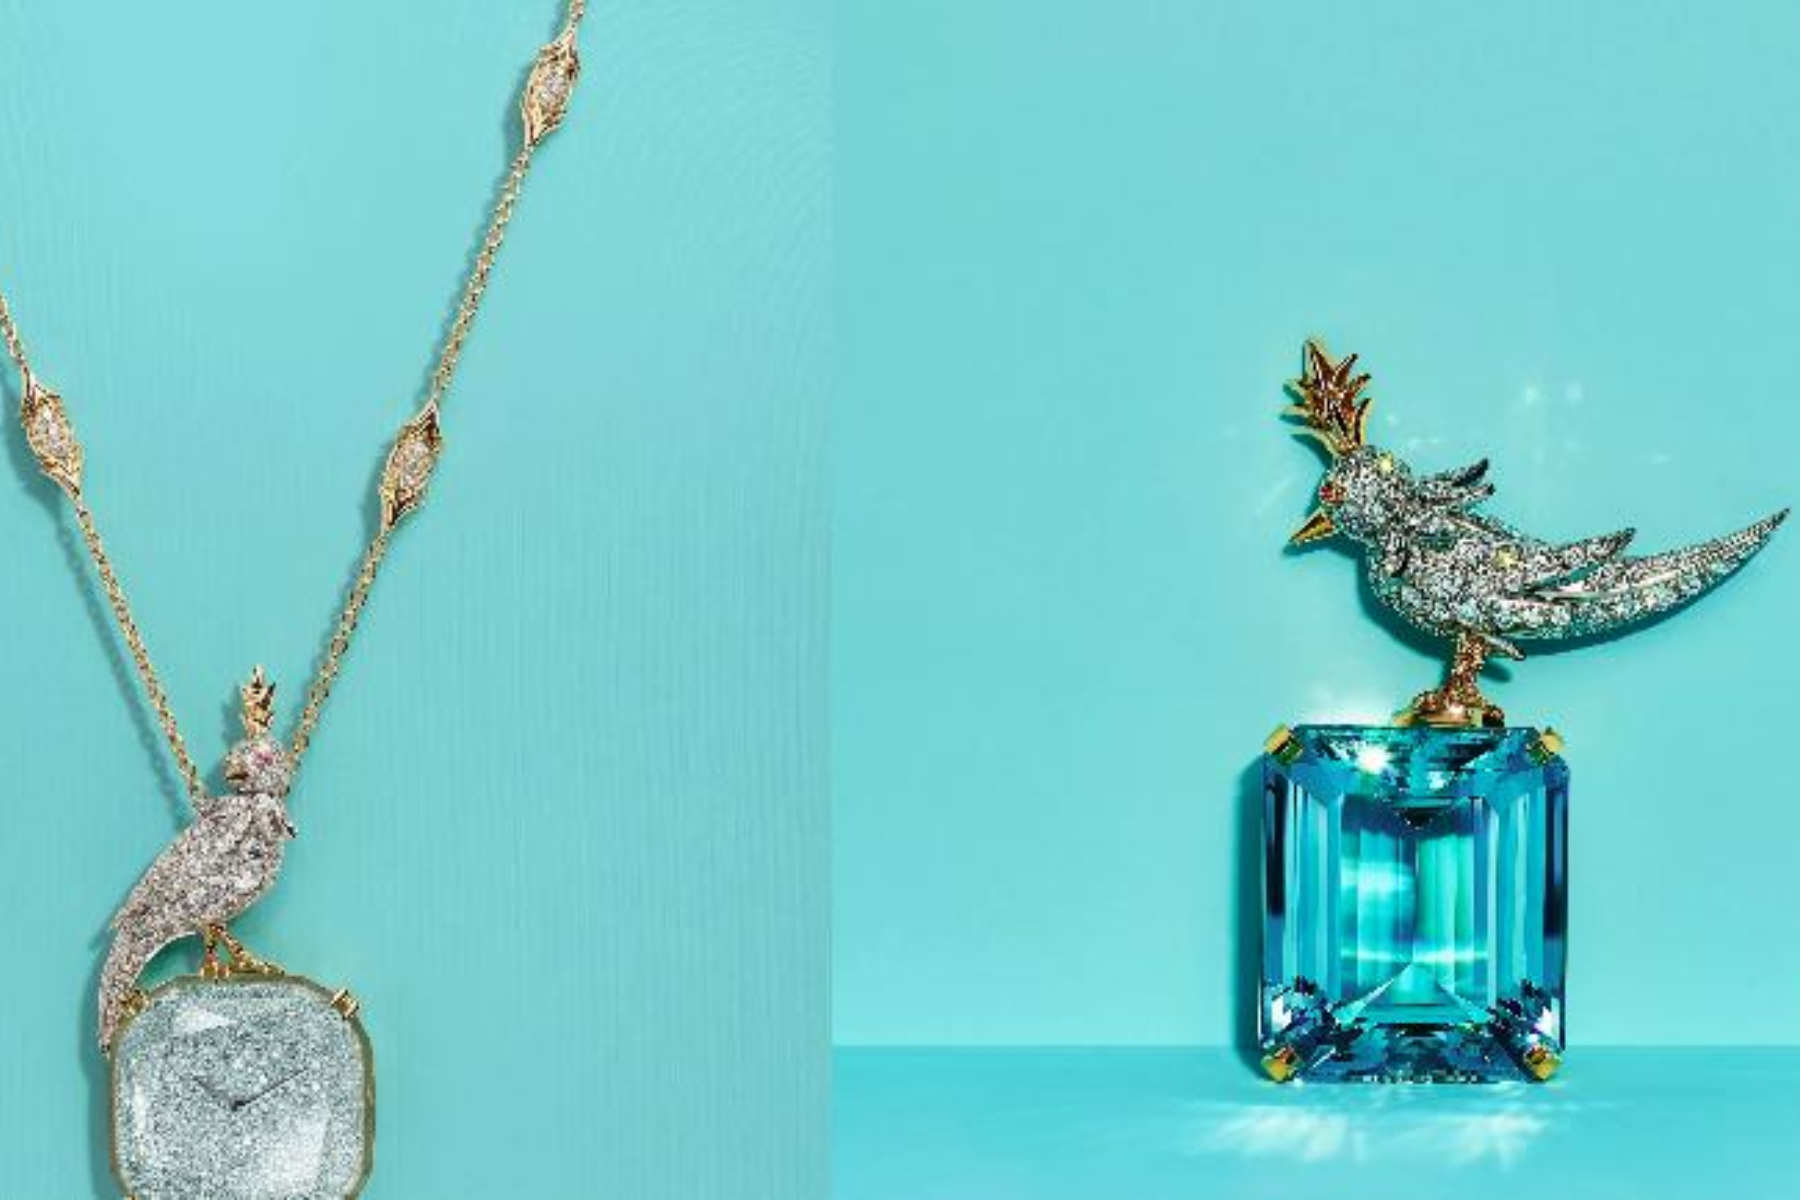 A close-up of a bird on a rock pendant watch, right next to a blue stone that also has a bird